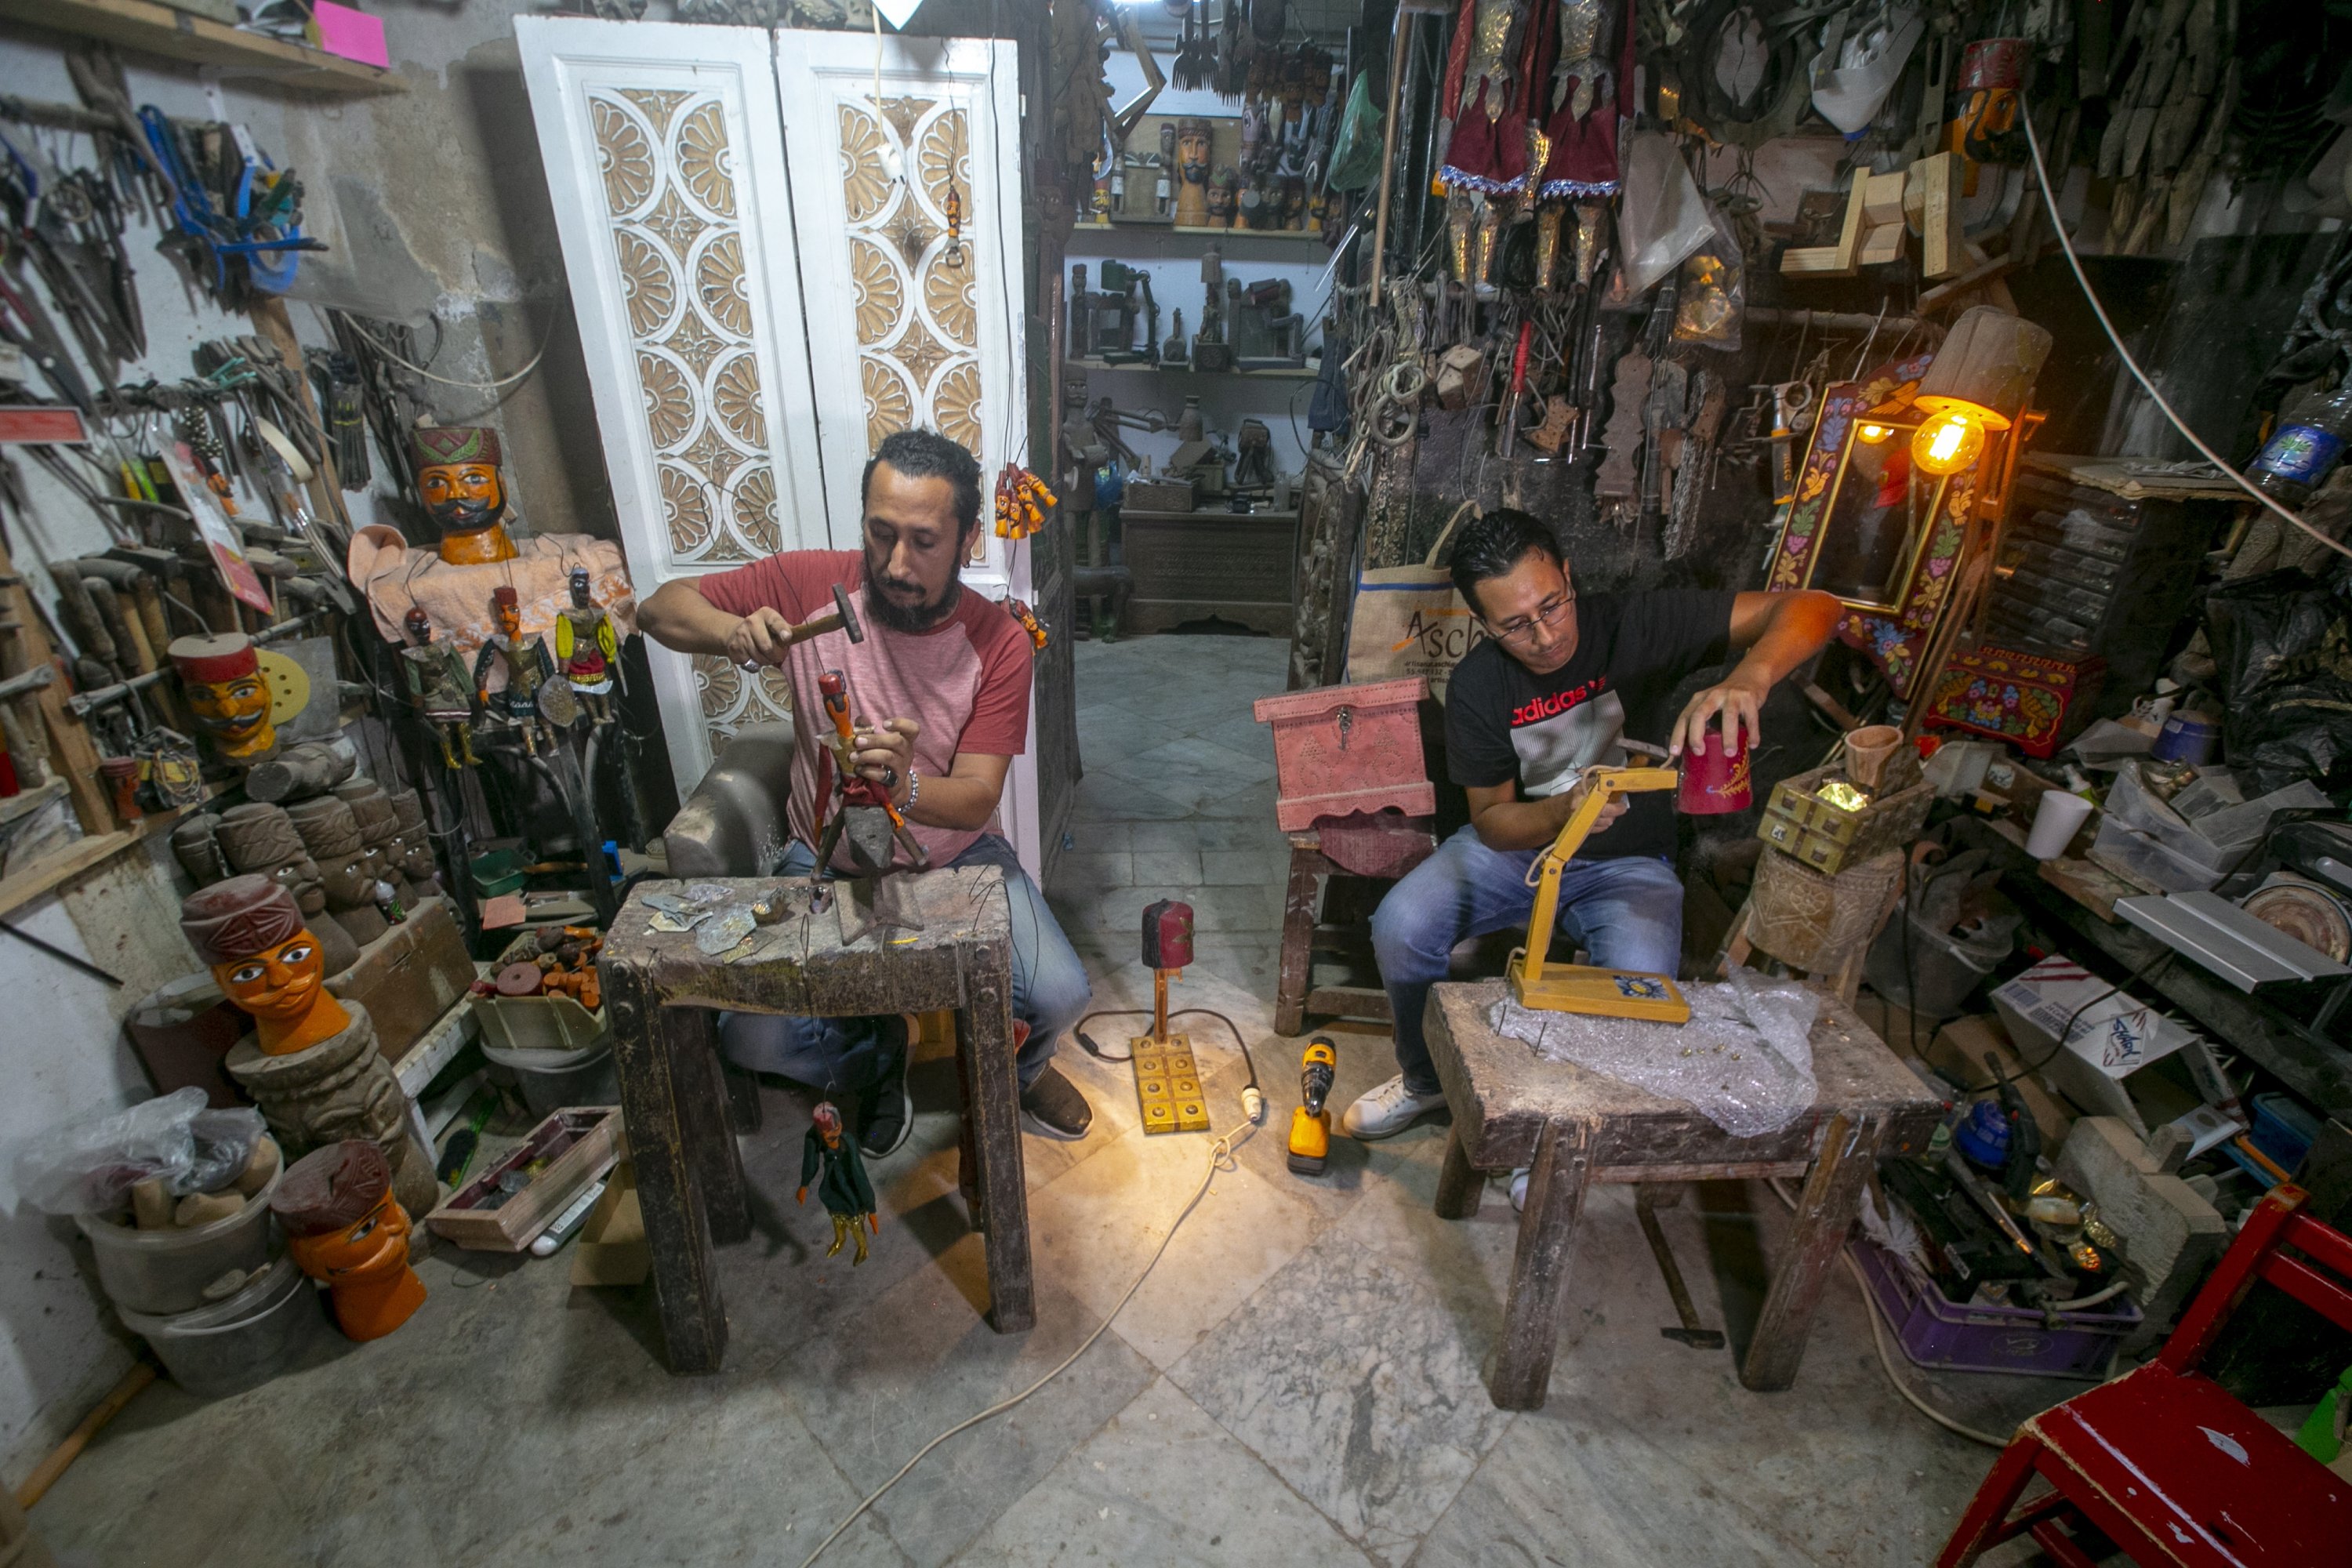 Tunisian brothers Adel and Ismail el-Ashi make puppets in their workshop in the capital Tunis, Tunisia, Oct. 10, 2020. (AA Photo)